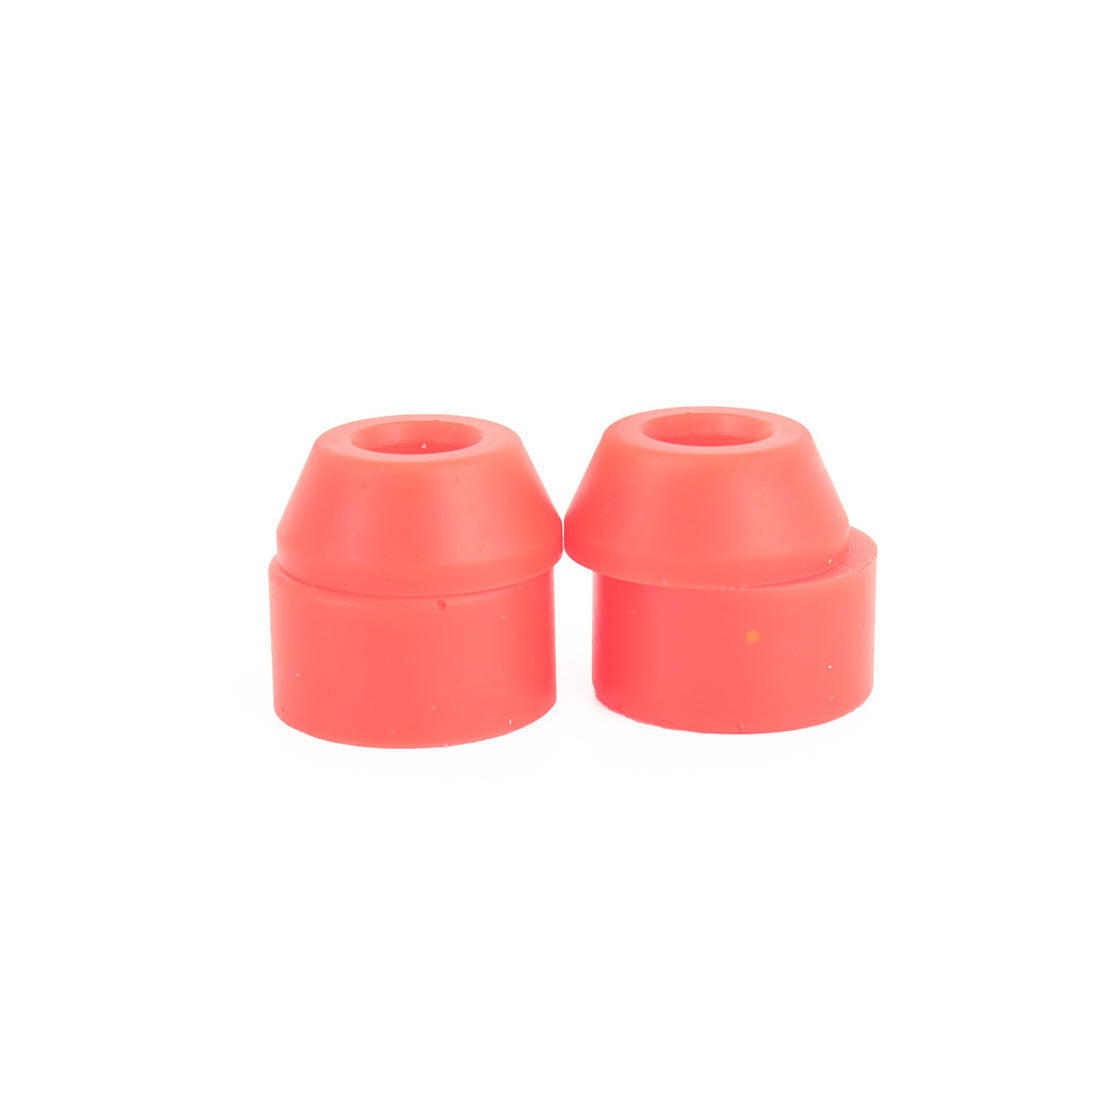 Spew Monkey 94a Cone/Barrel Bushings Combo 4pk - Fluro Red Skateboard Hardware and Parts